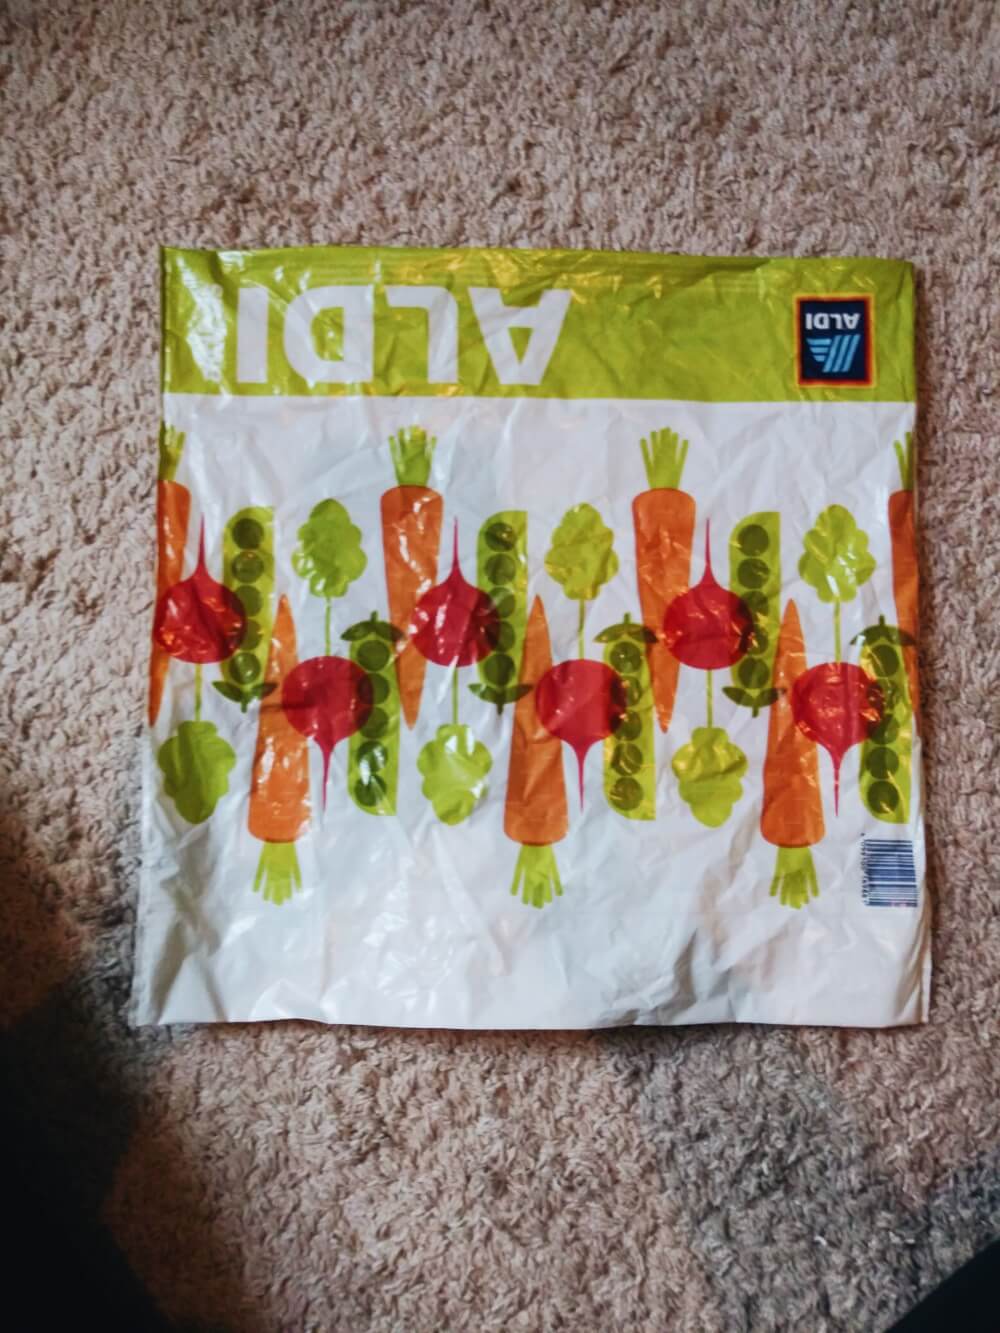 Flat Aldi grocery bag, upside down, with handles tucked in